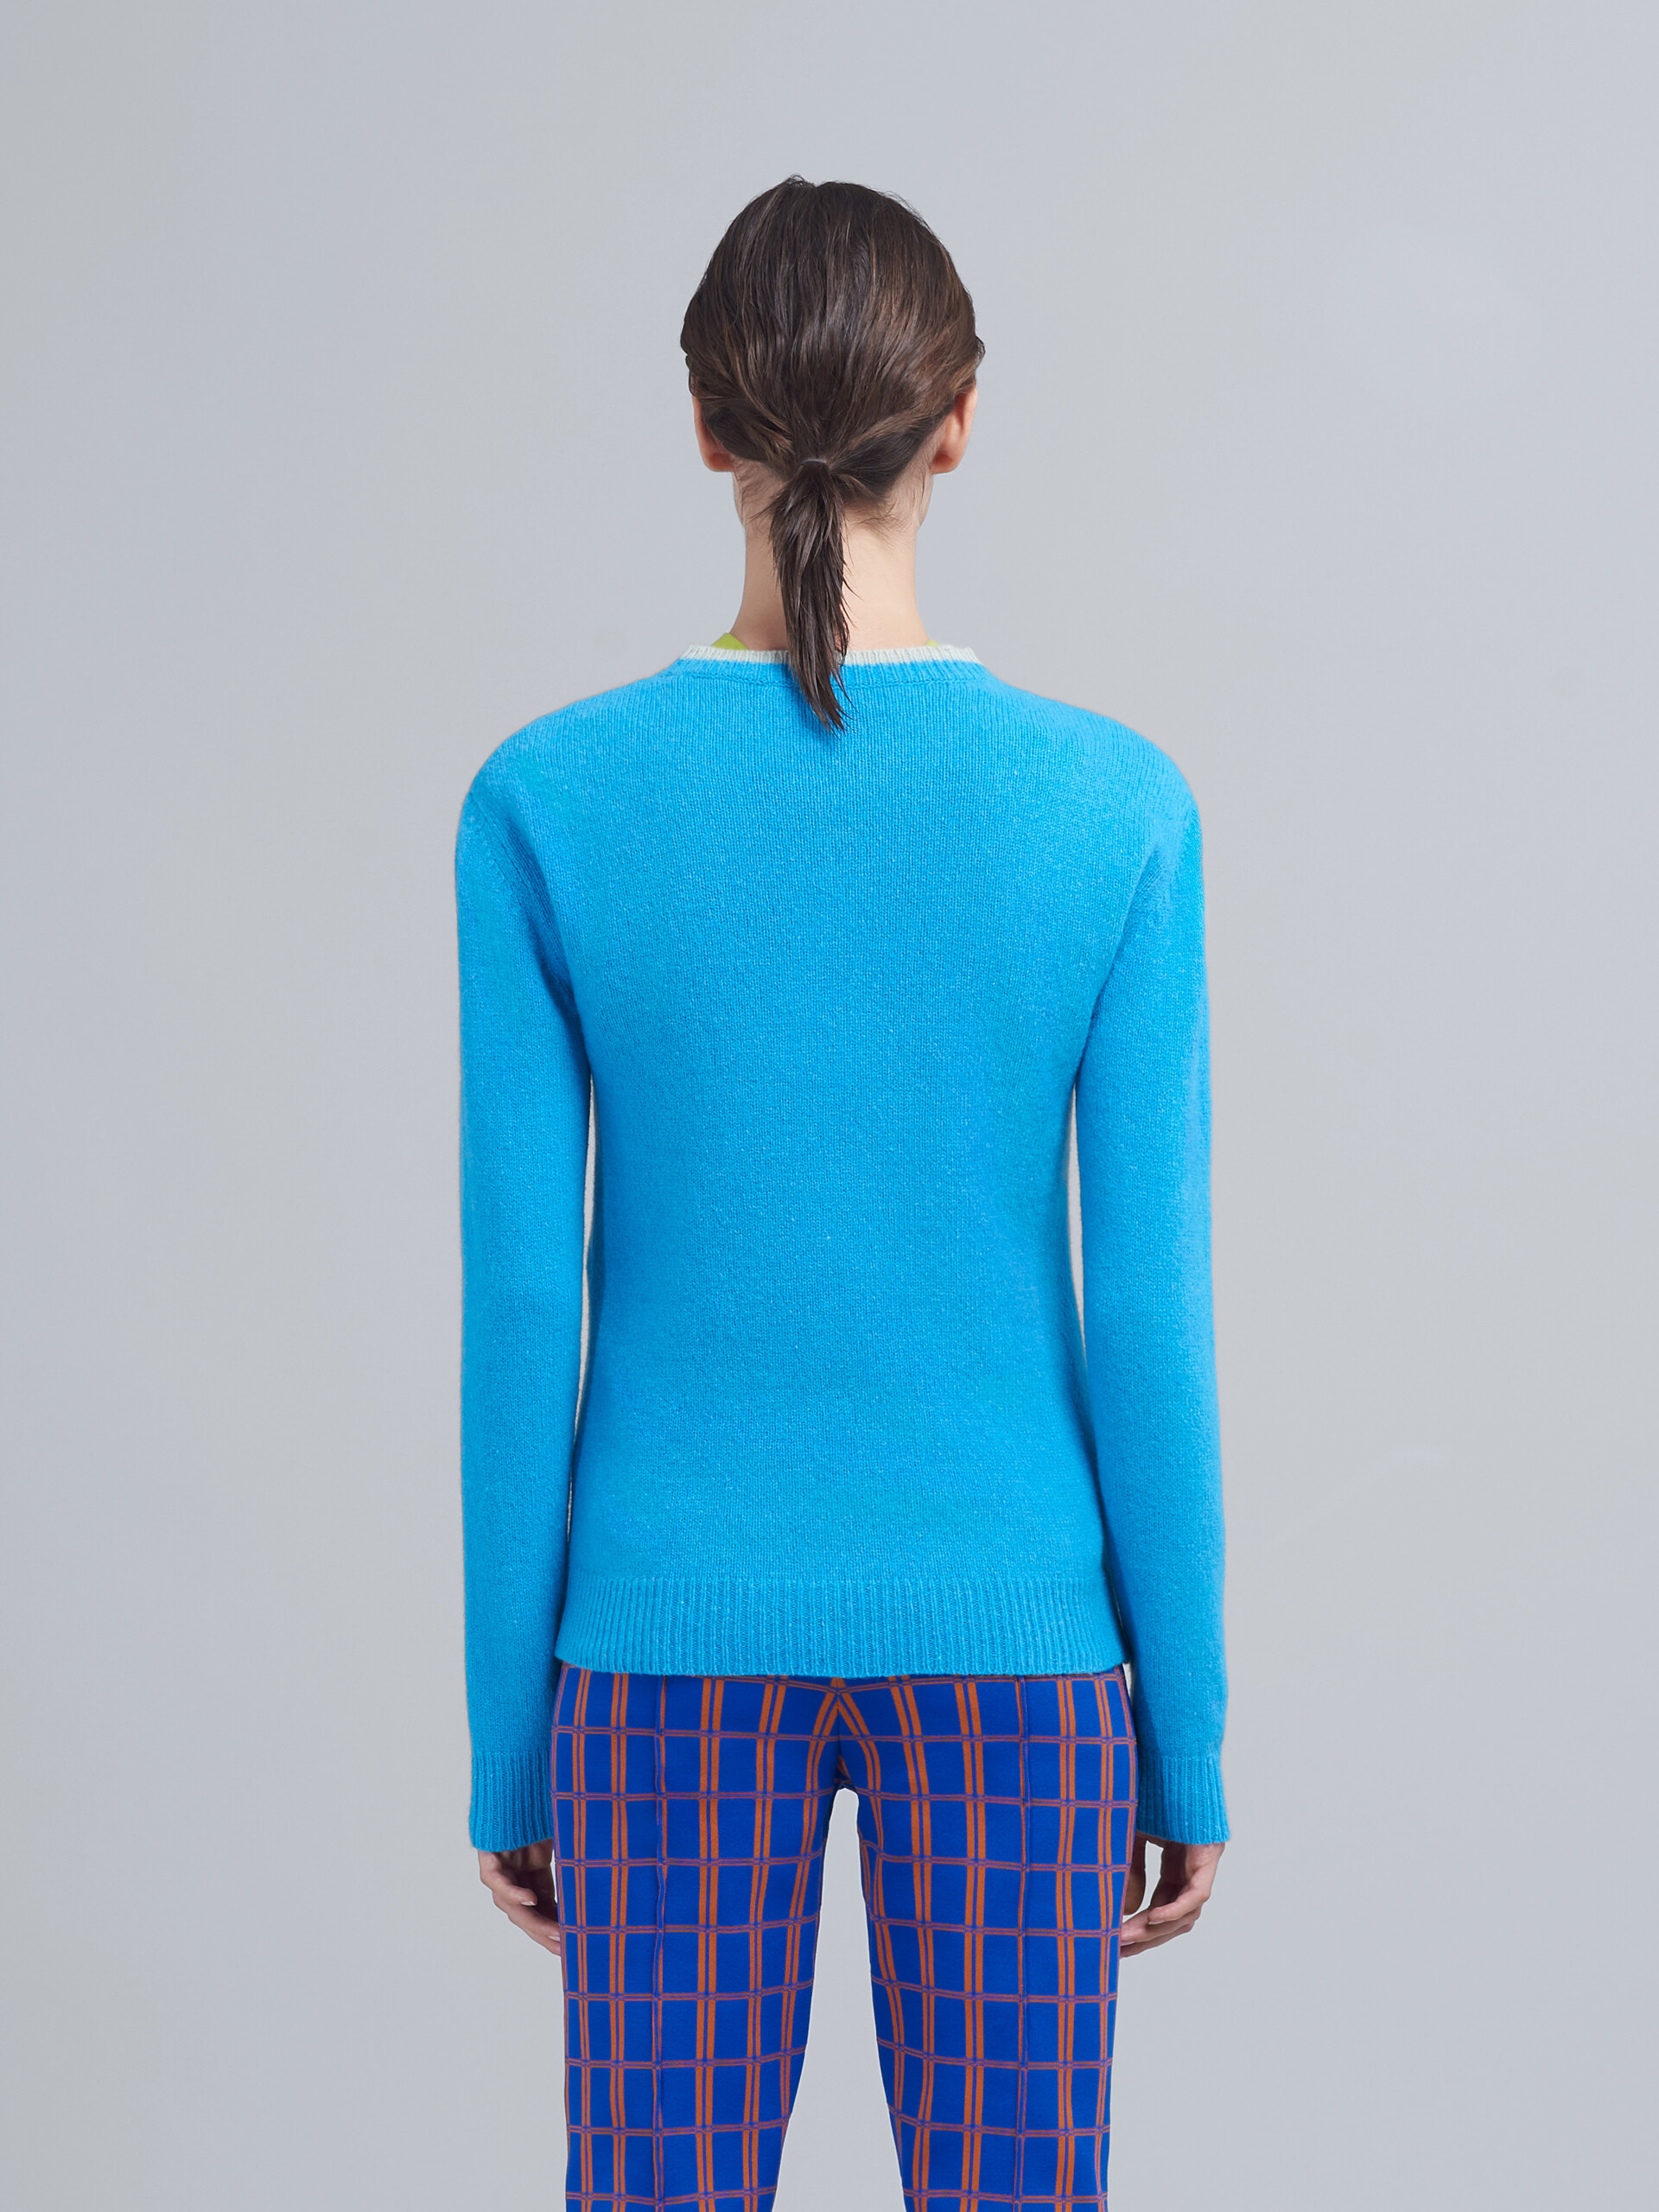 70’s flower cashmere sweater - Pullovers - Image 3